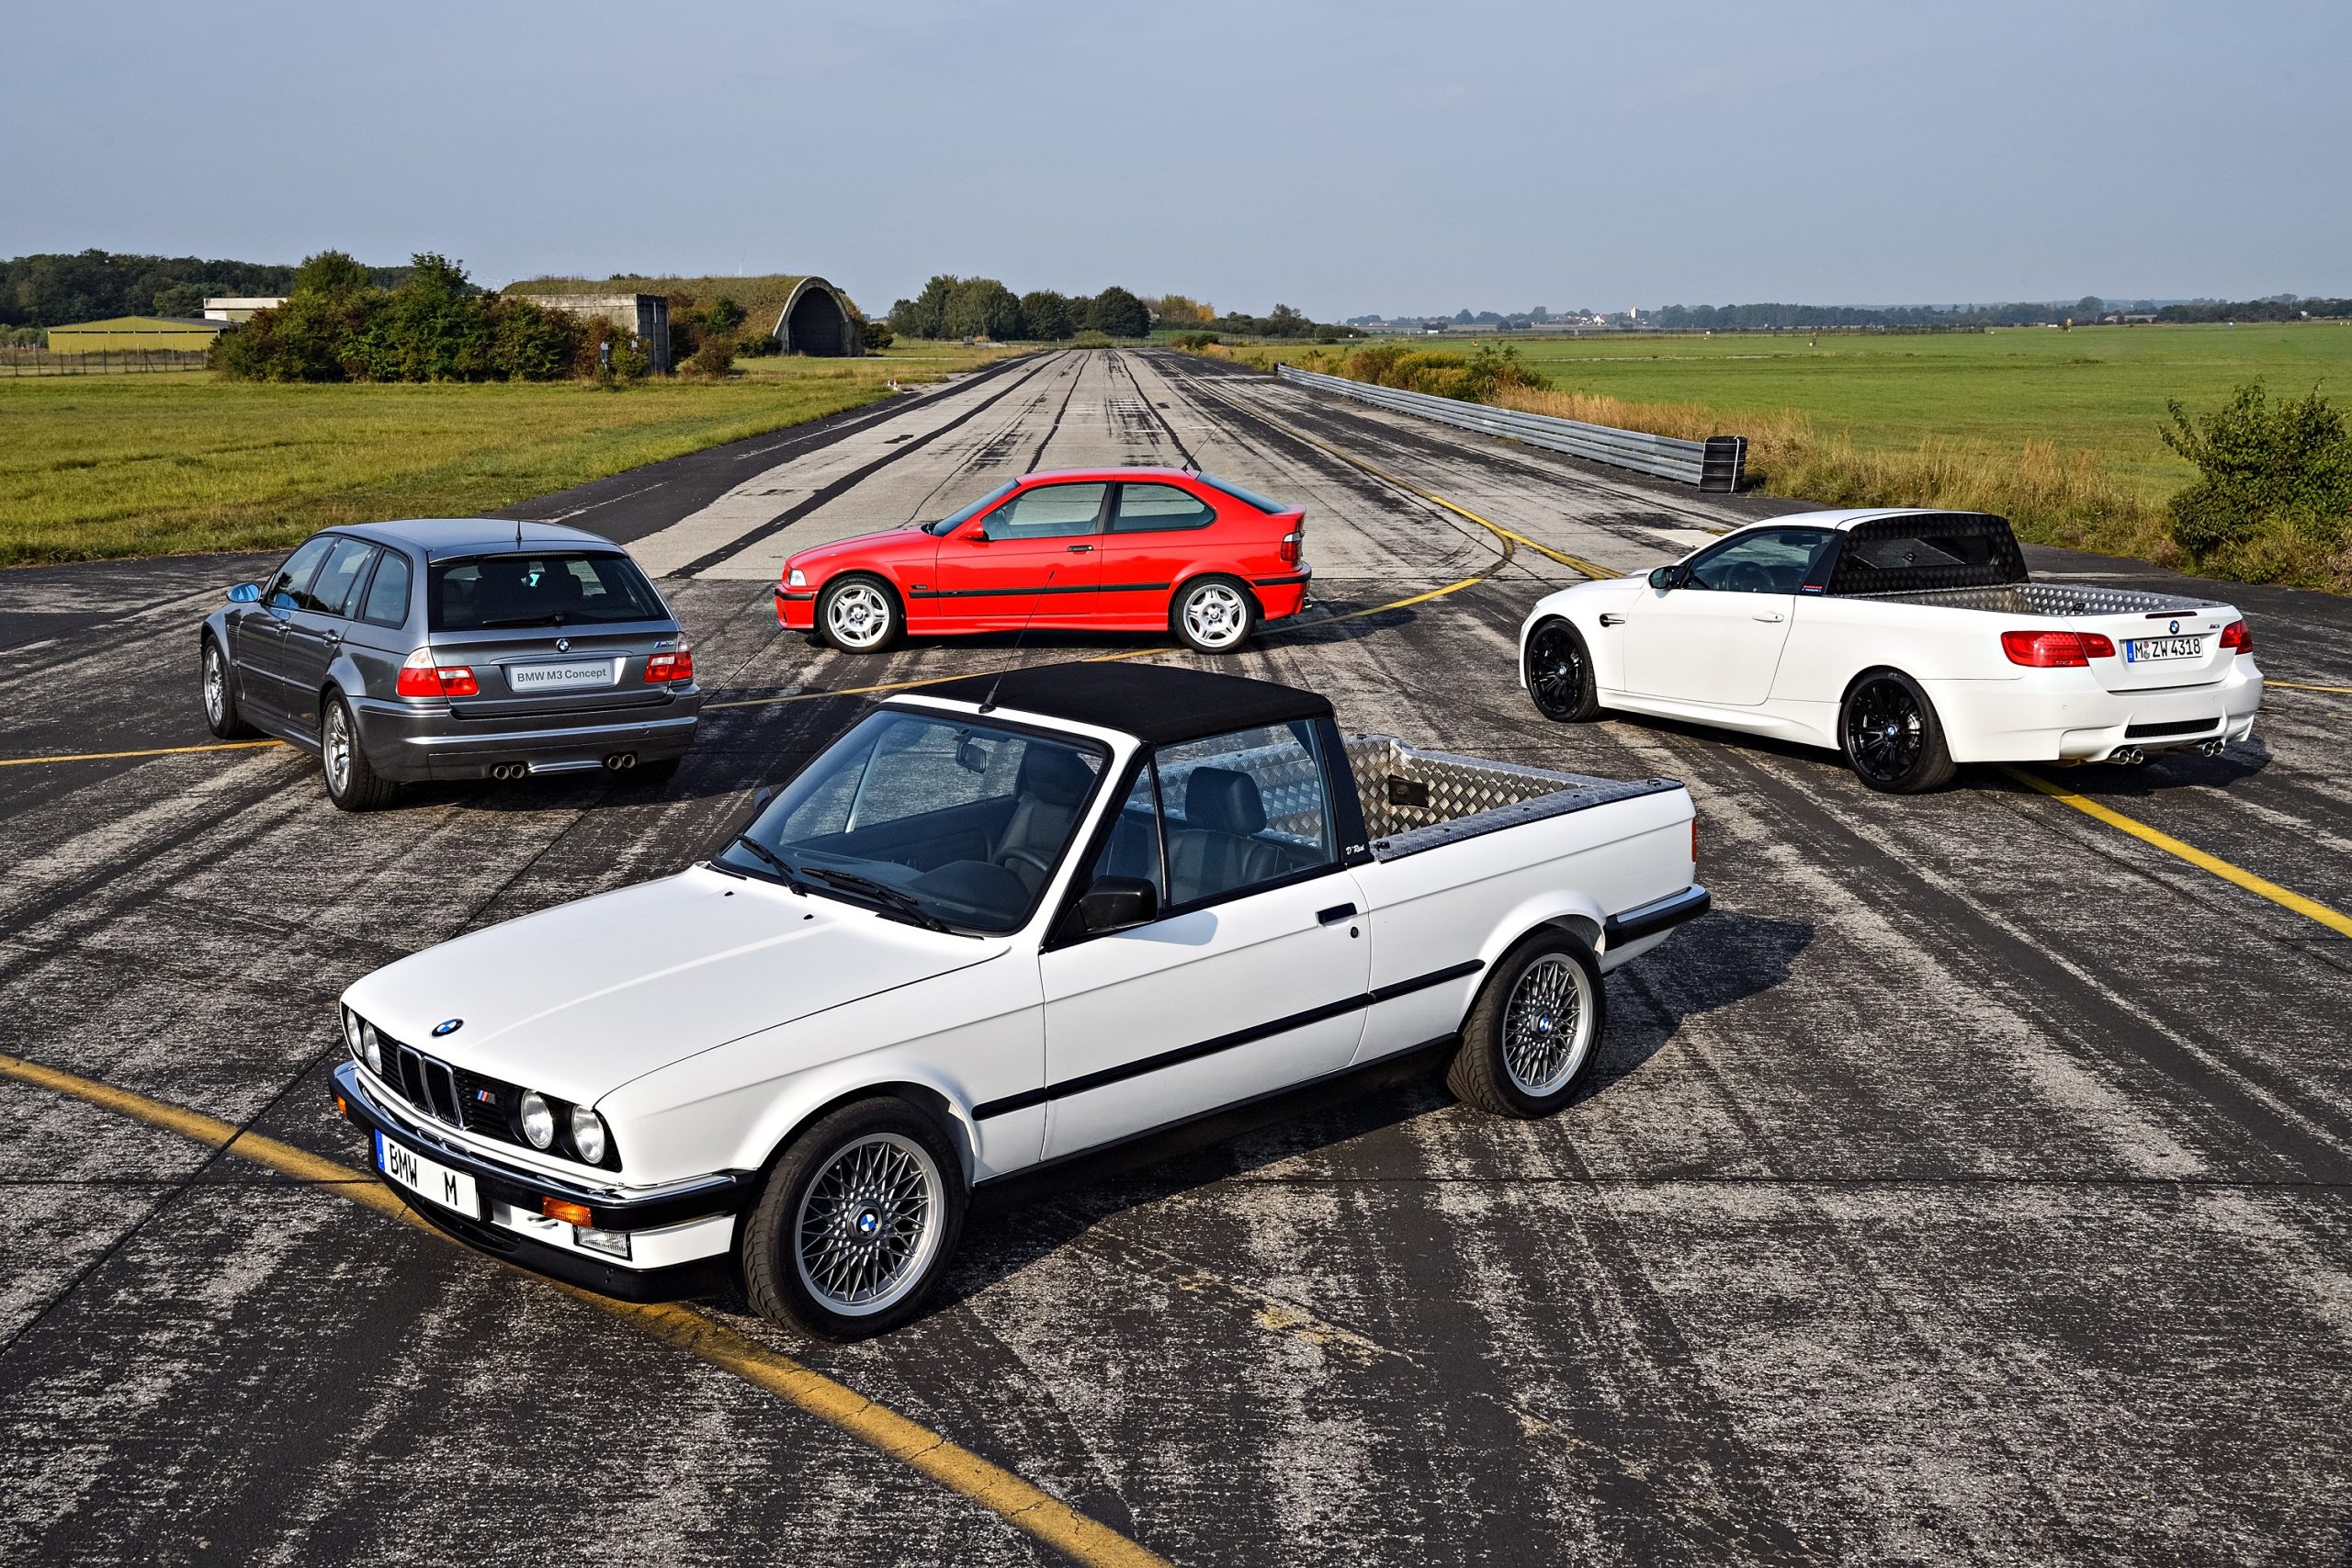 A group of prototype M3 models, including an E30 truck